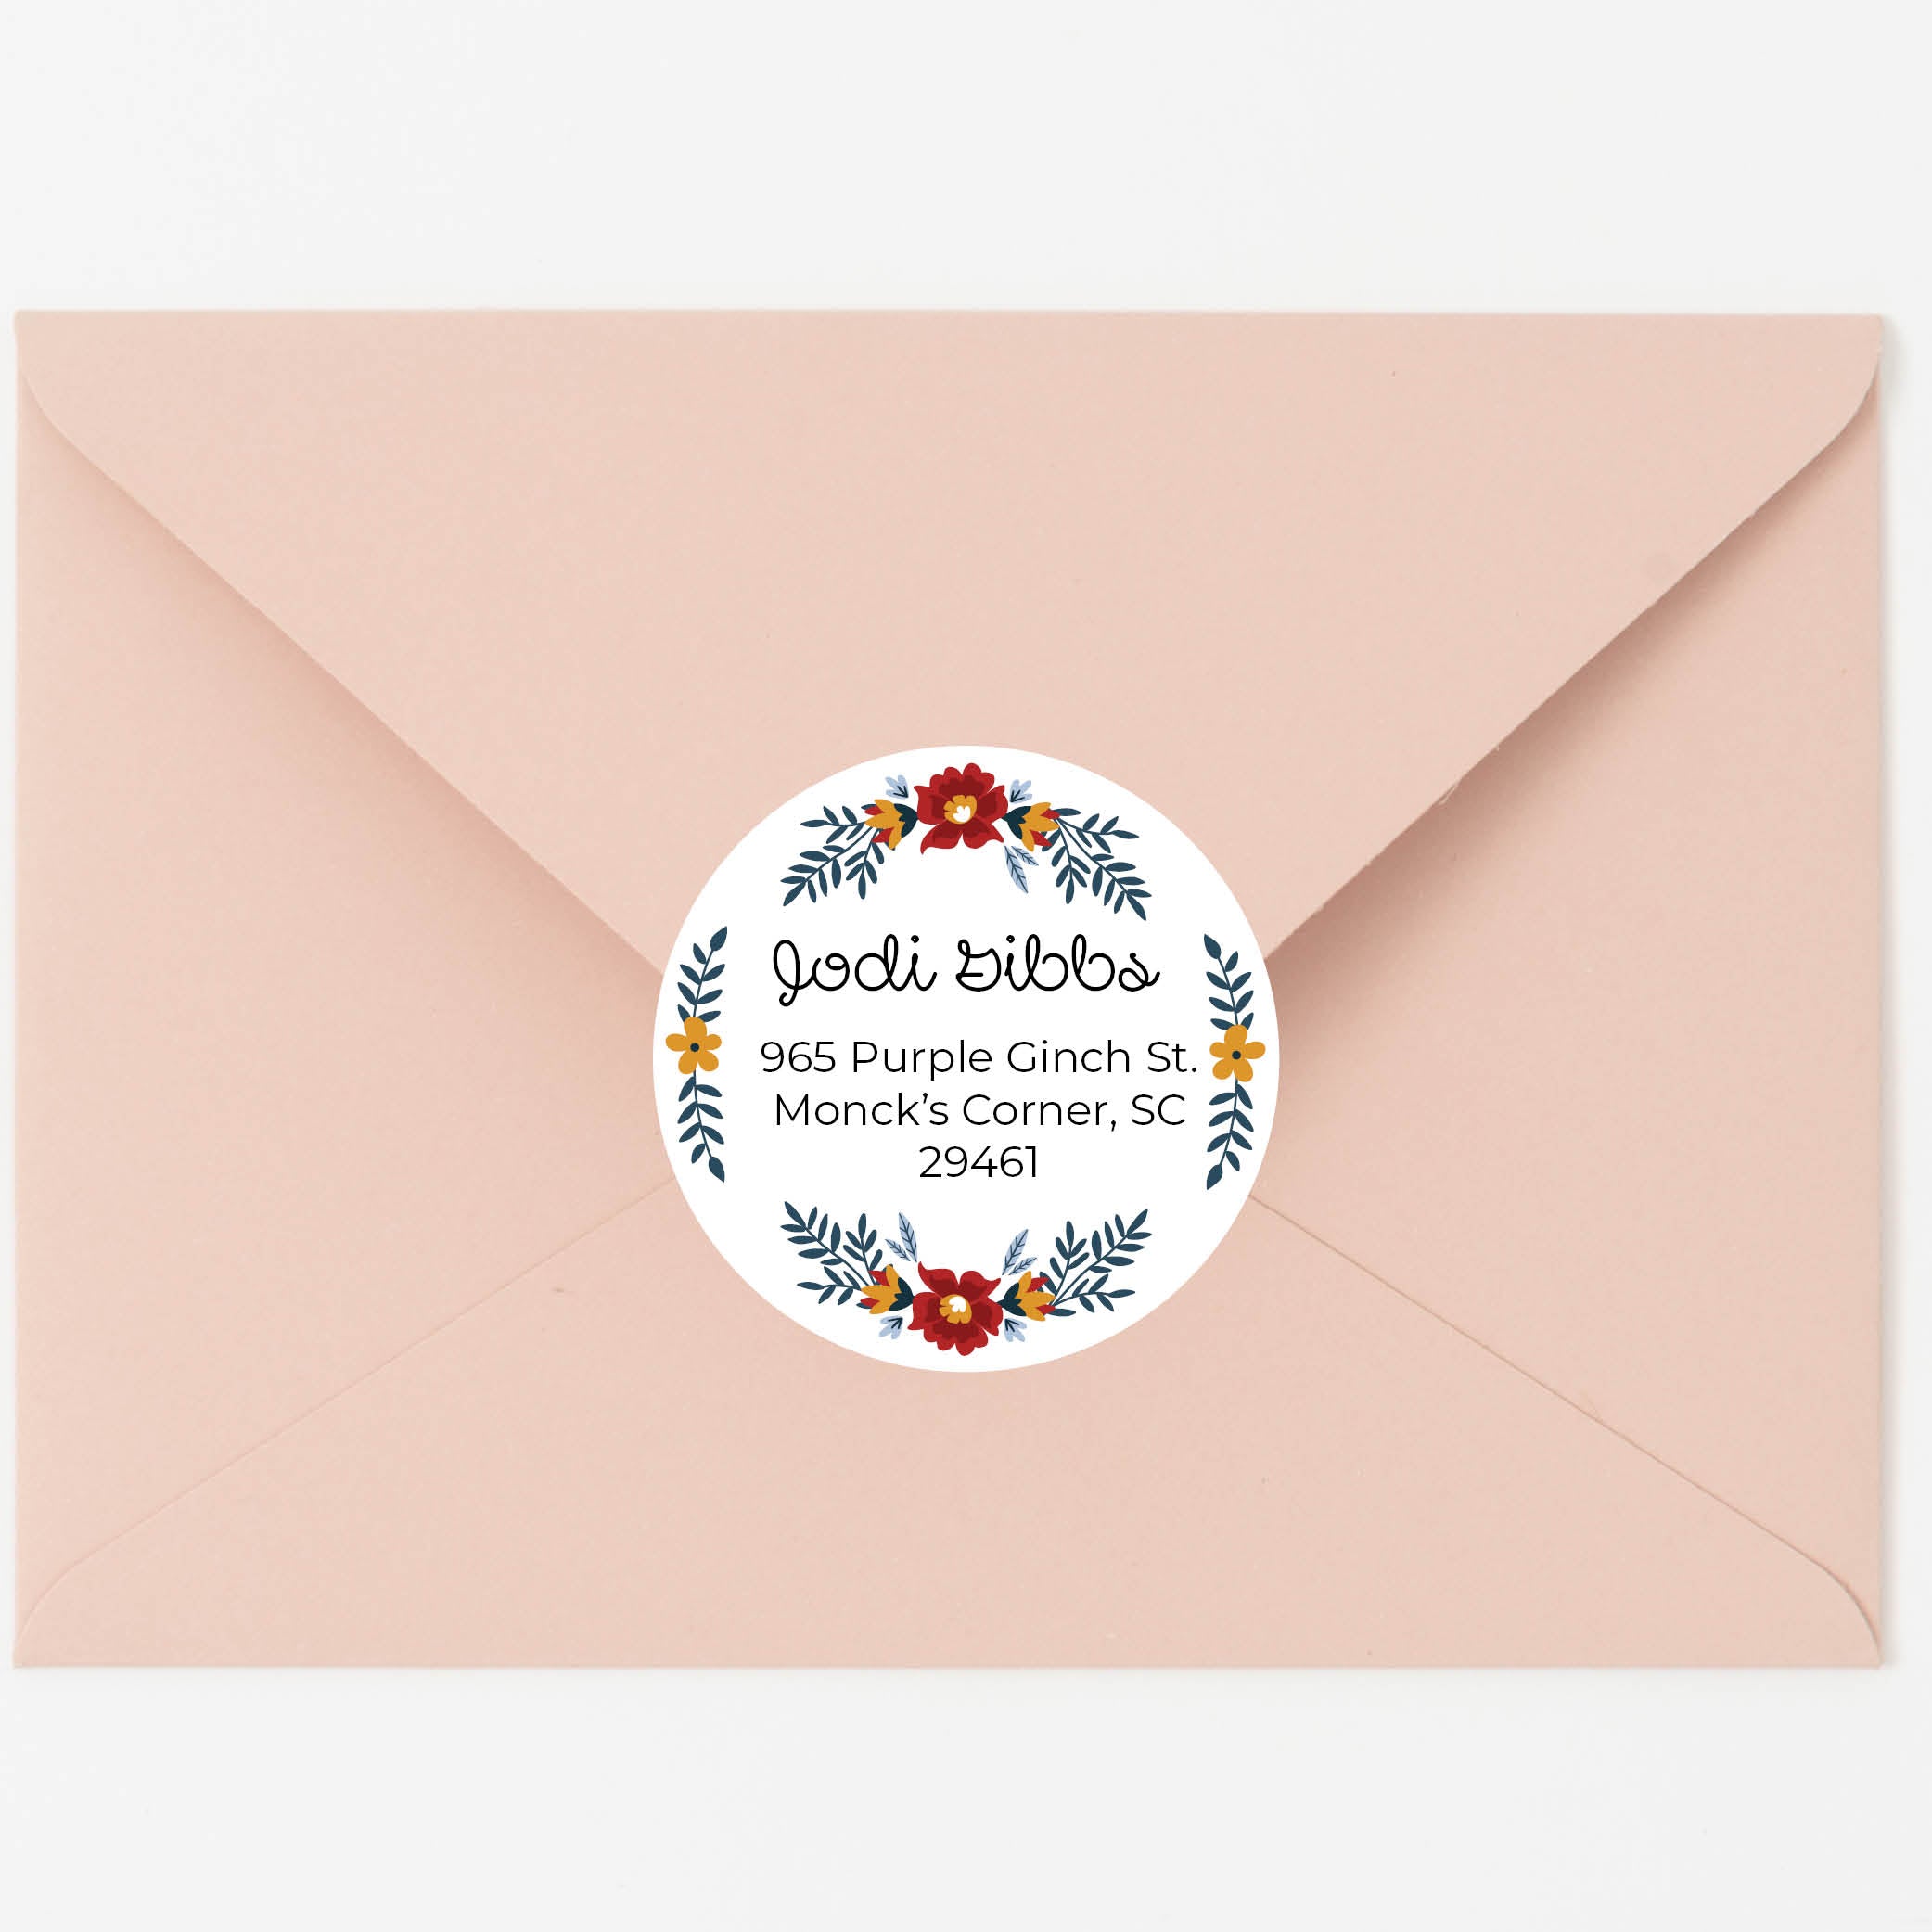 Floral Round Return Address Labels - Circles with Flowers